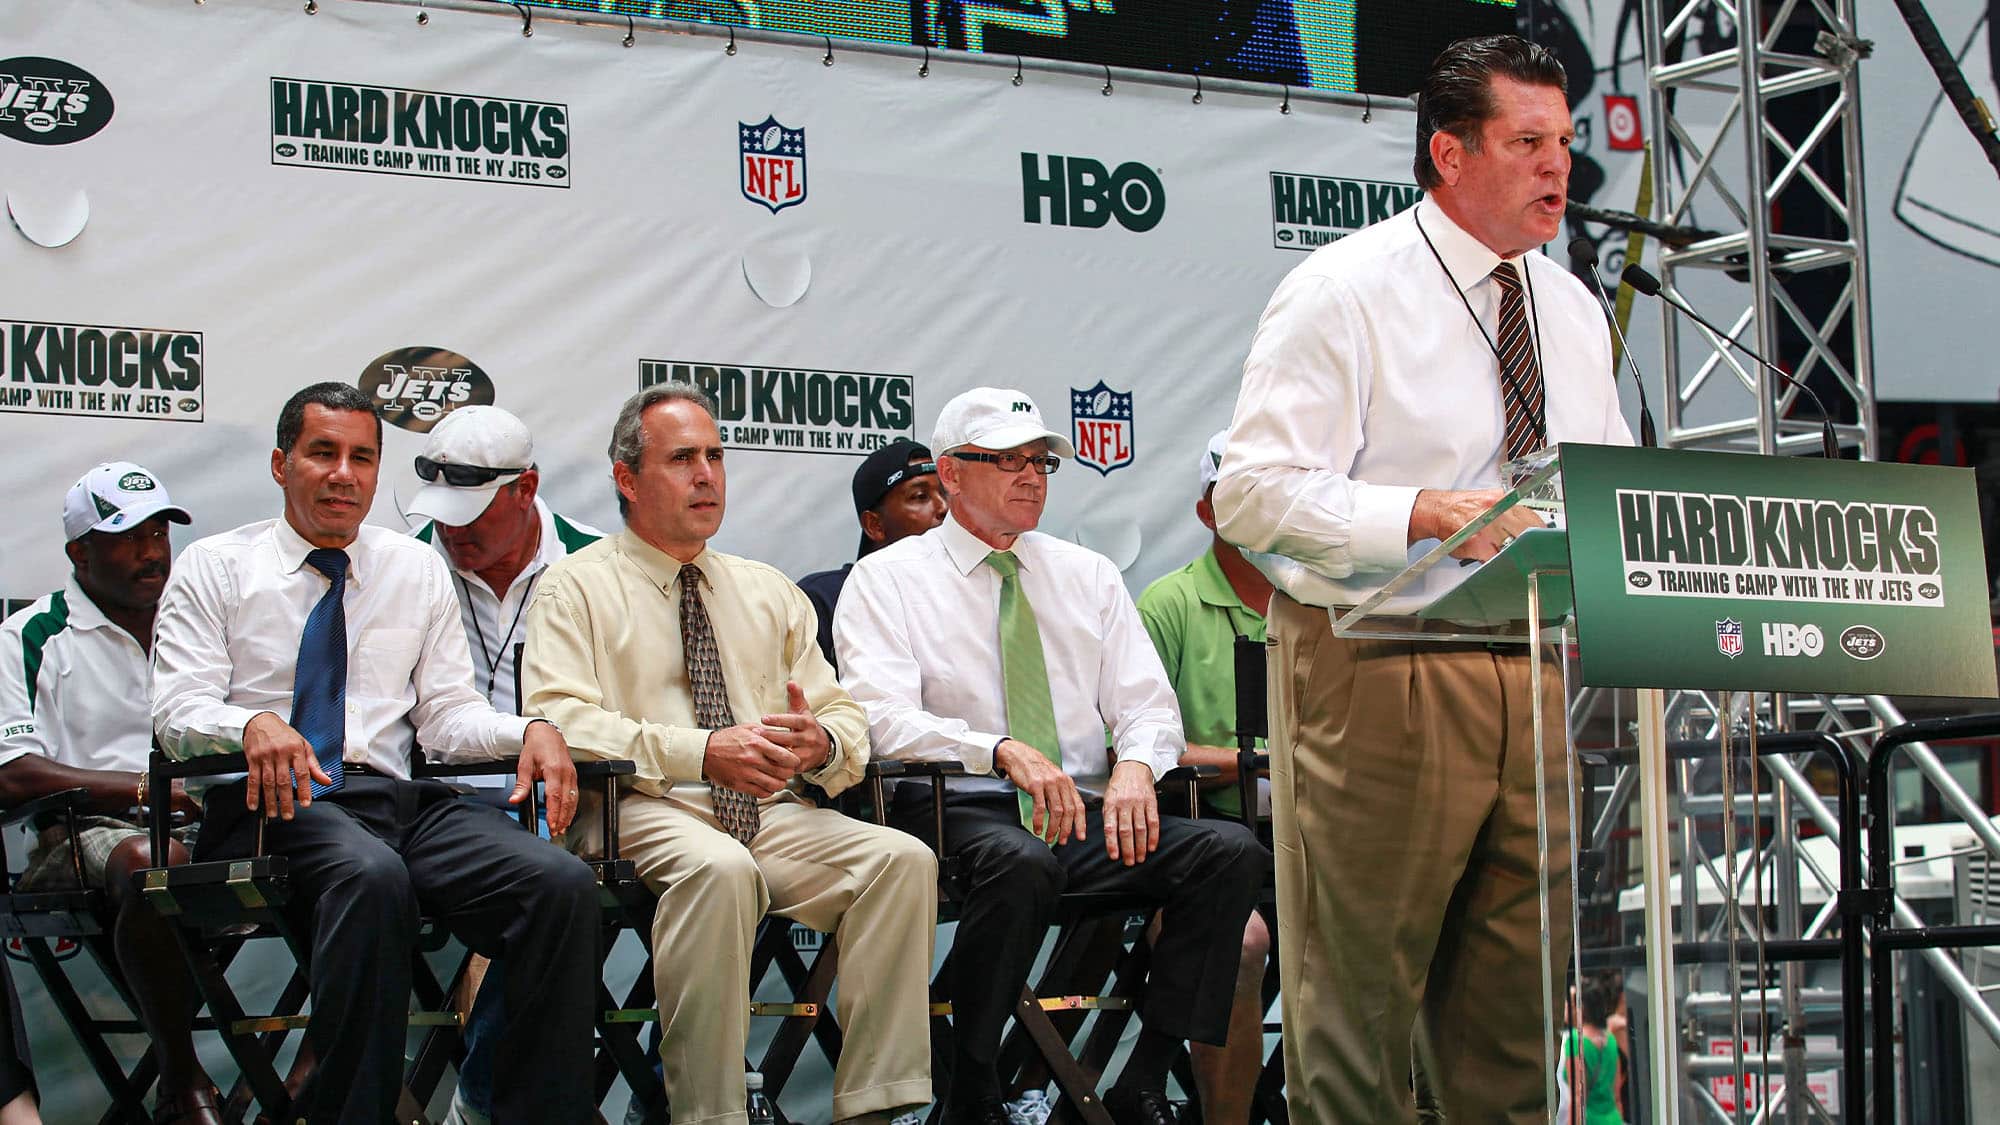 Jets on Hard Knocks: 3 teams who survived HBO (and 3 who didn't)